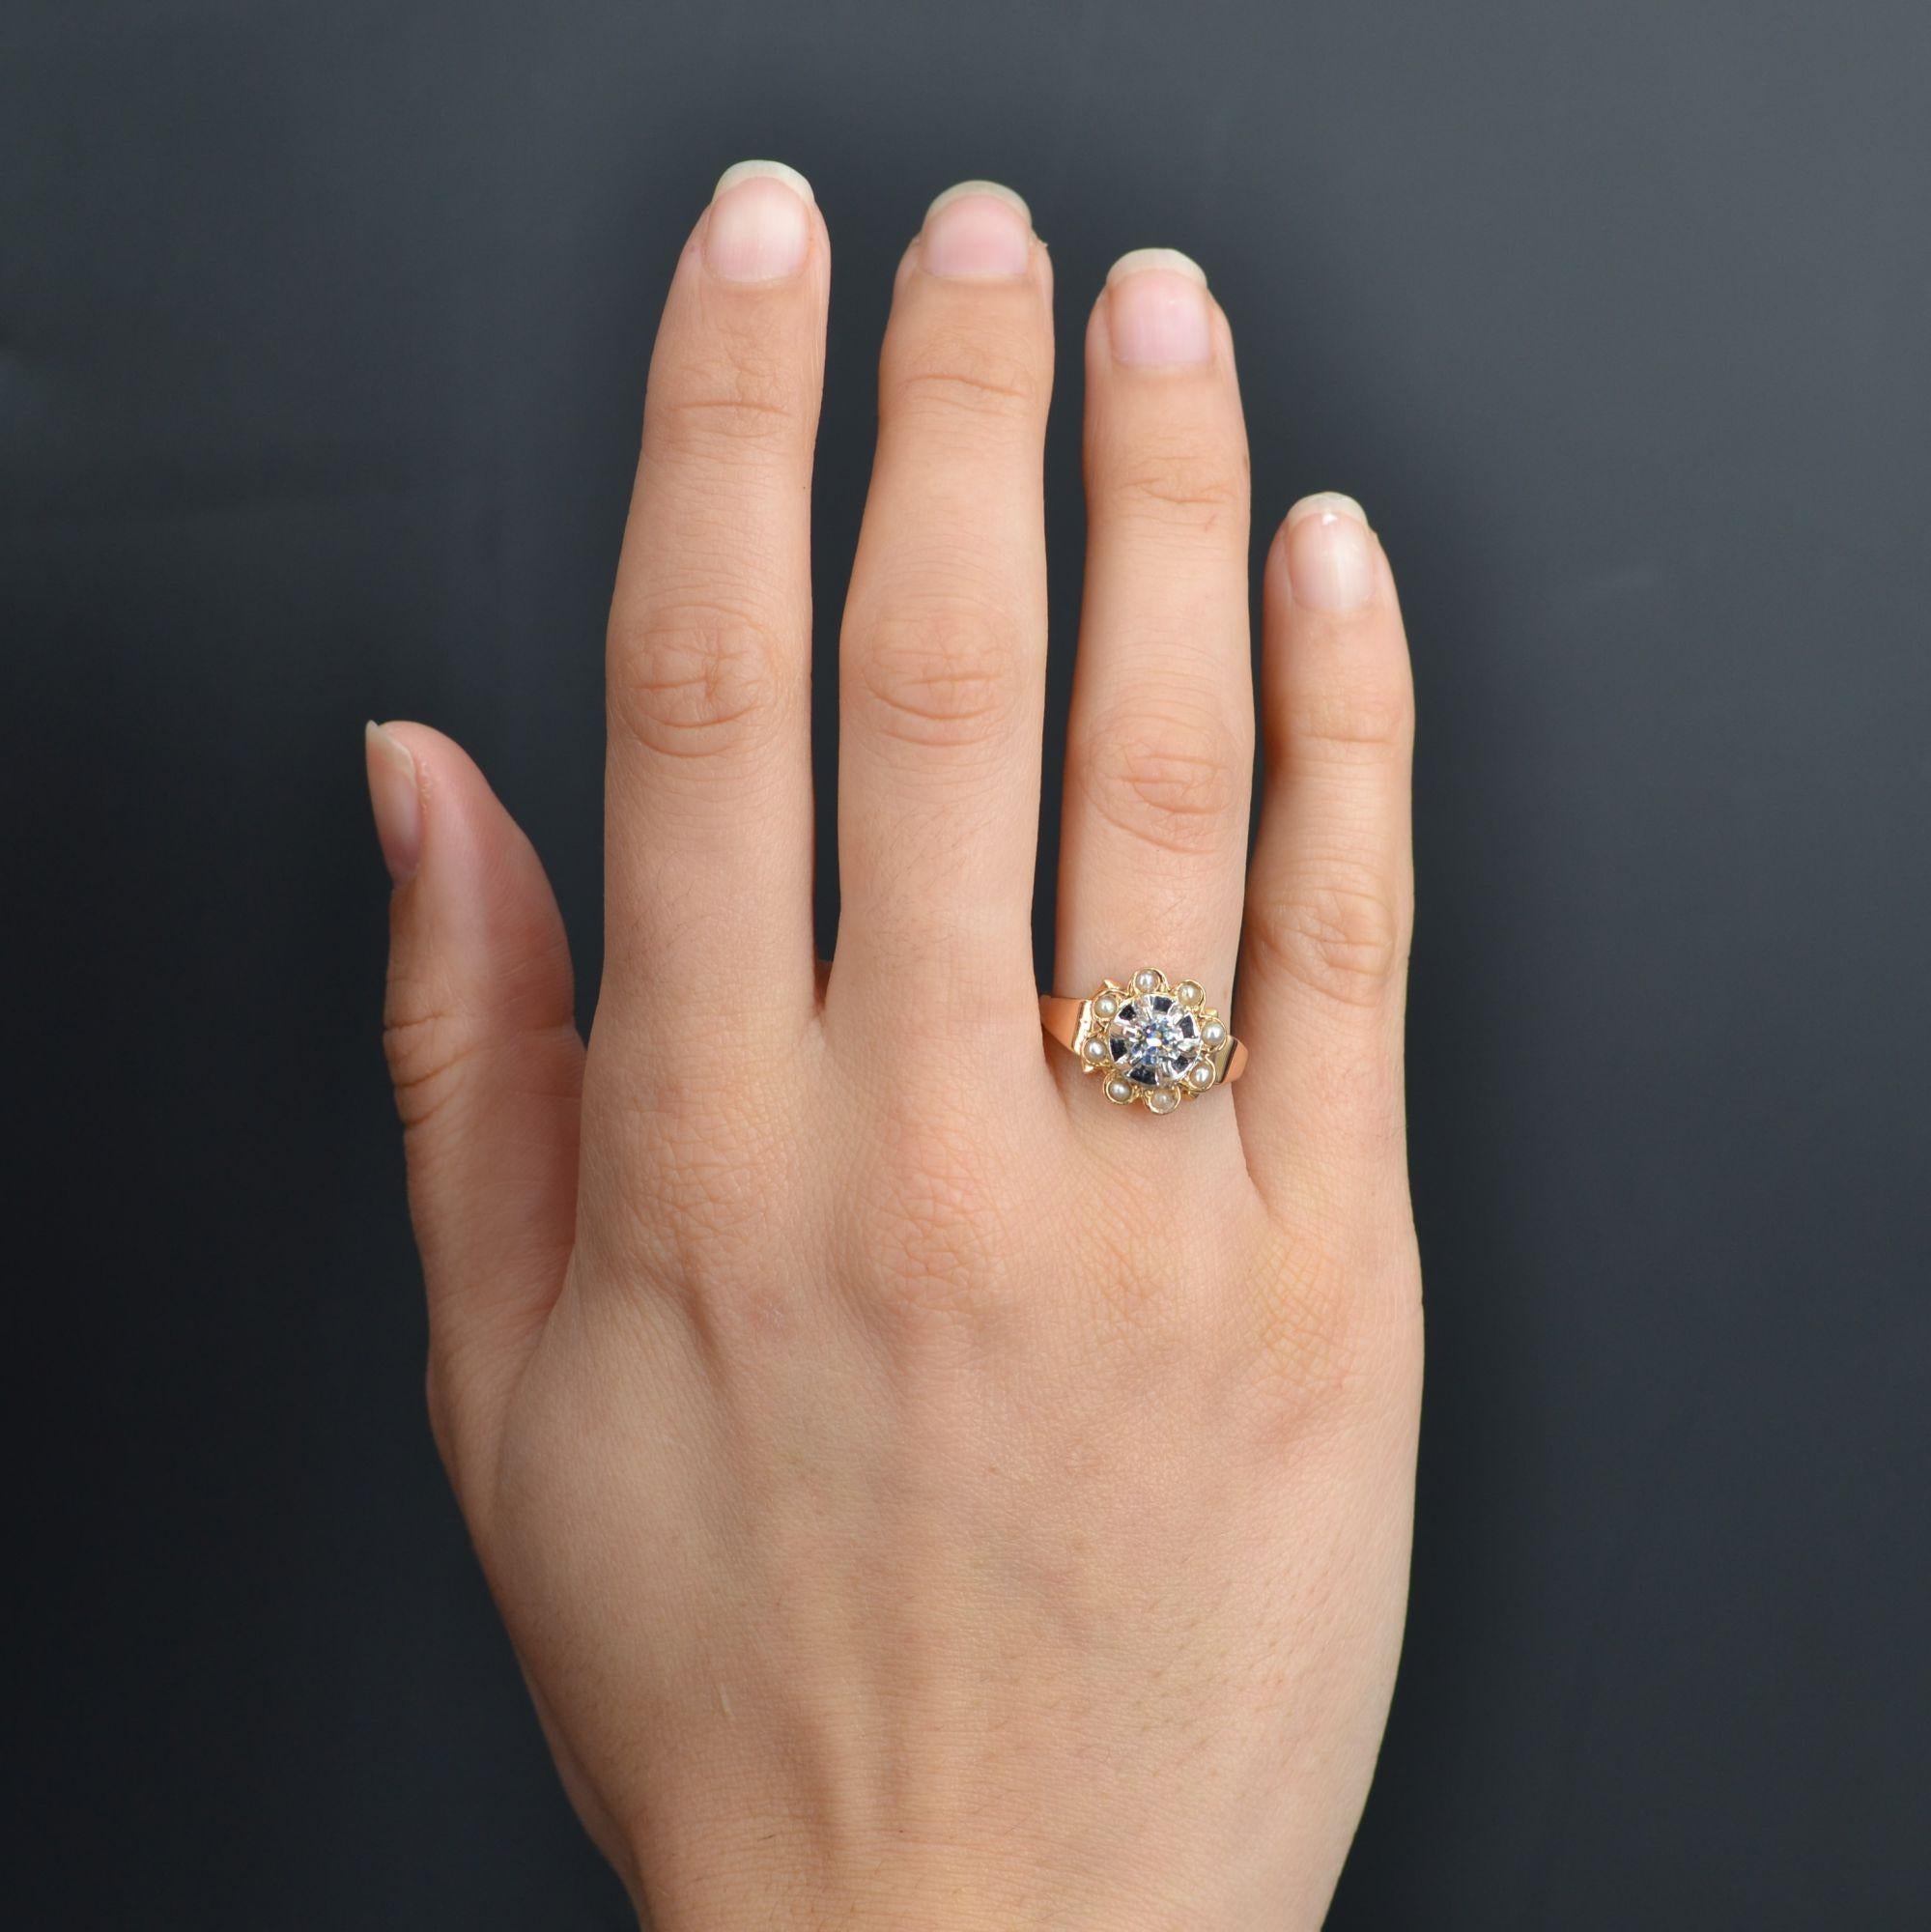 Ring in 18 karat rose gold.
Delightful and original retro ring, it is decorated with an antique brilliant- cut diamond, set on platinum claws, and surrounded by half cultured pearls. The whole forming a flower pattern.
Weight of the diamond : 0.33